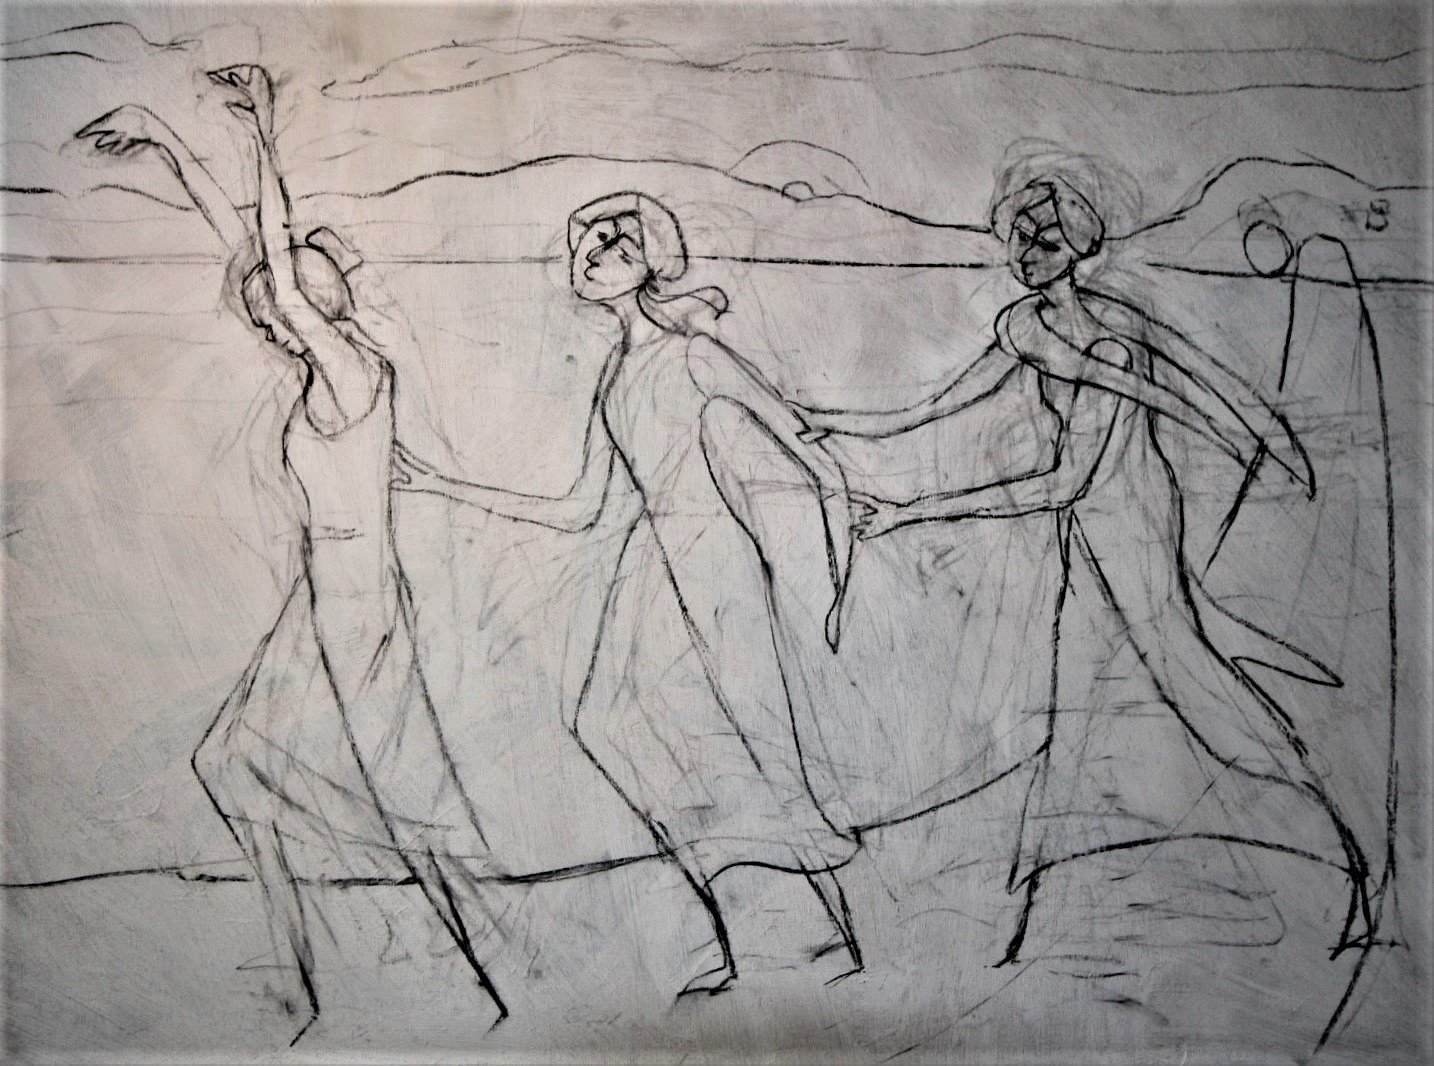 Work in Progress:  "Joanna, Mary and Salome " by Susana Youngsteadt